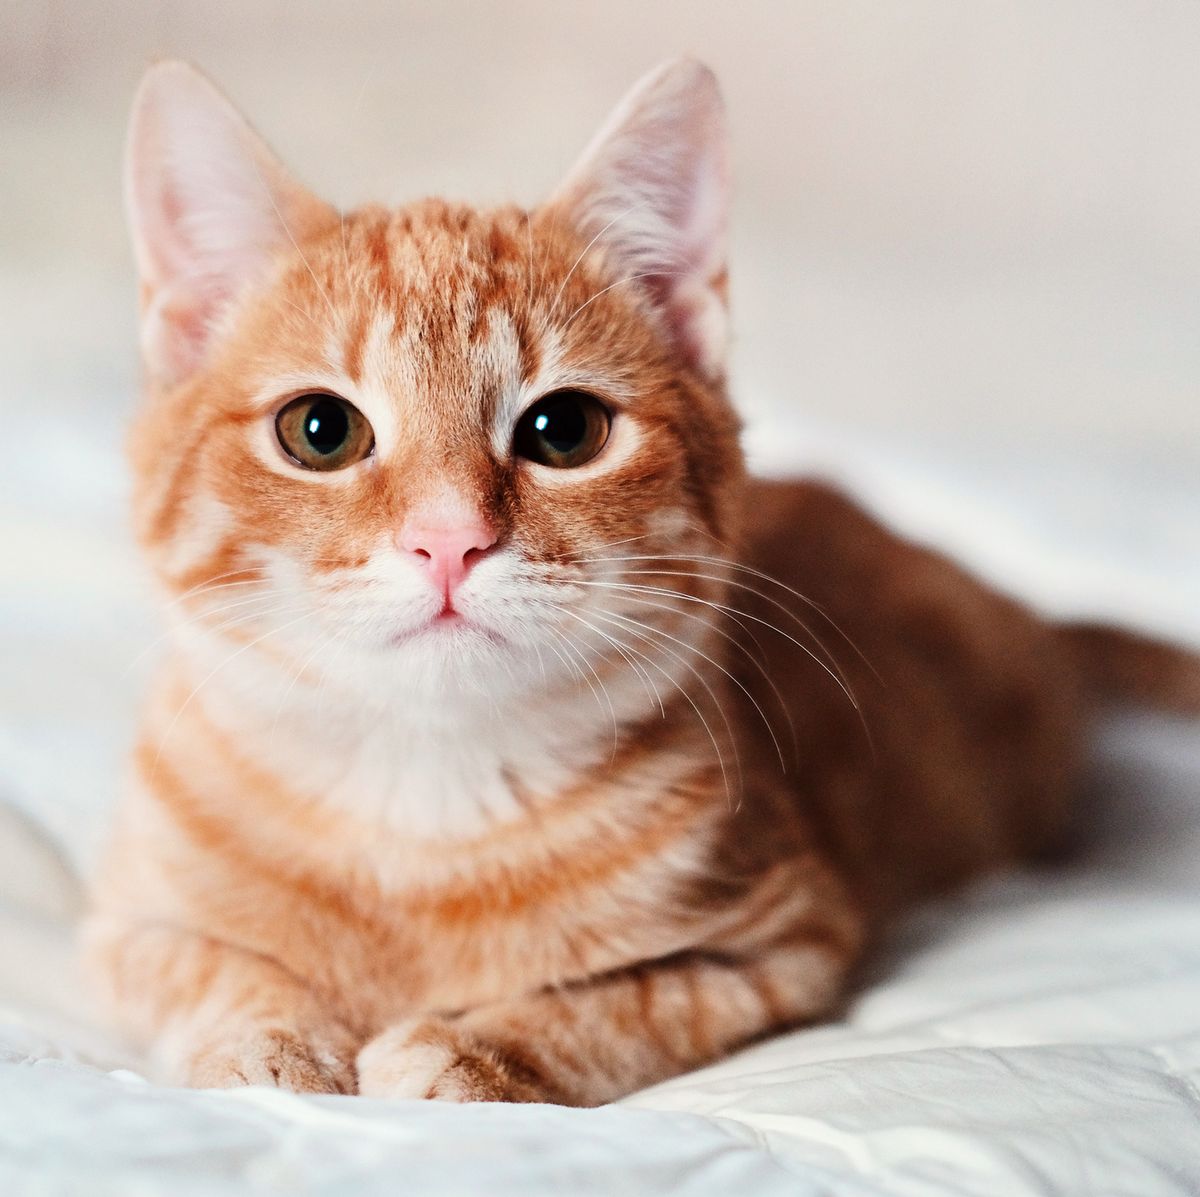 Validated! Watching Cute Cat Videos Boosts Productivity